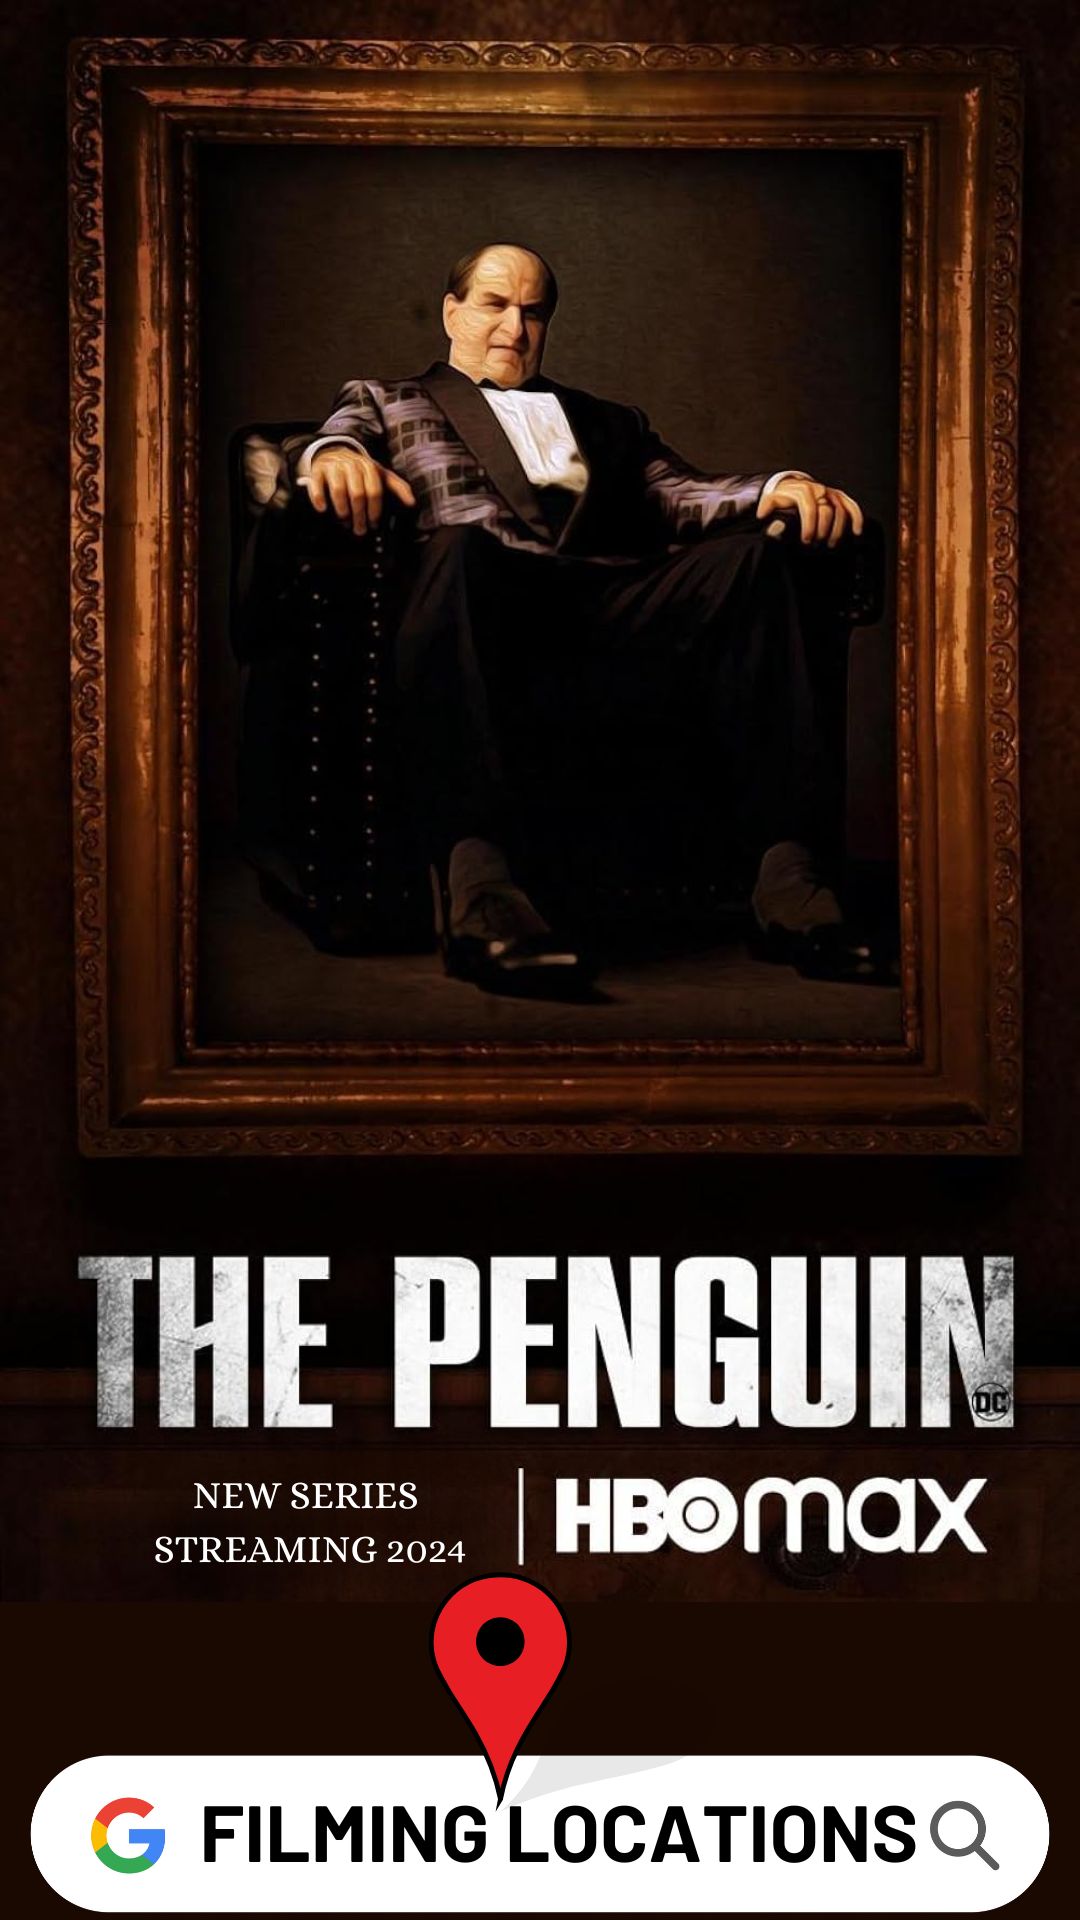 The Penguin Filming Locations